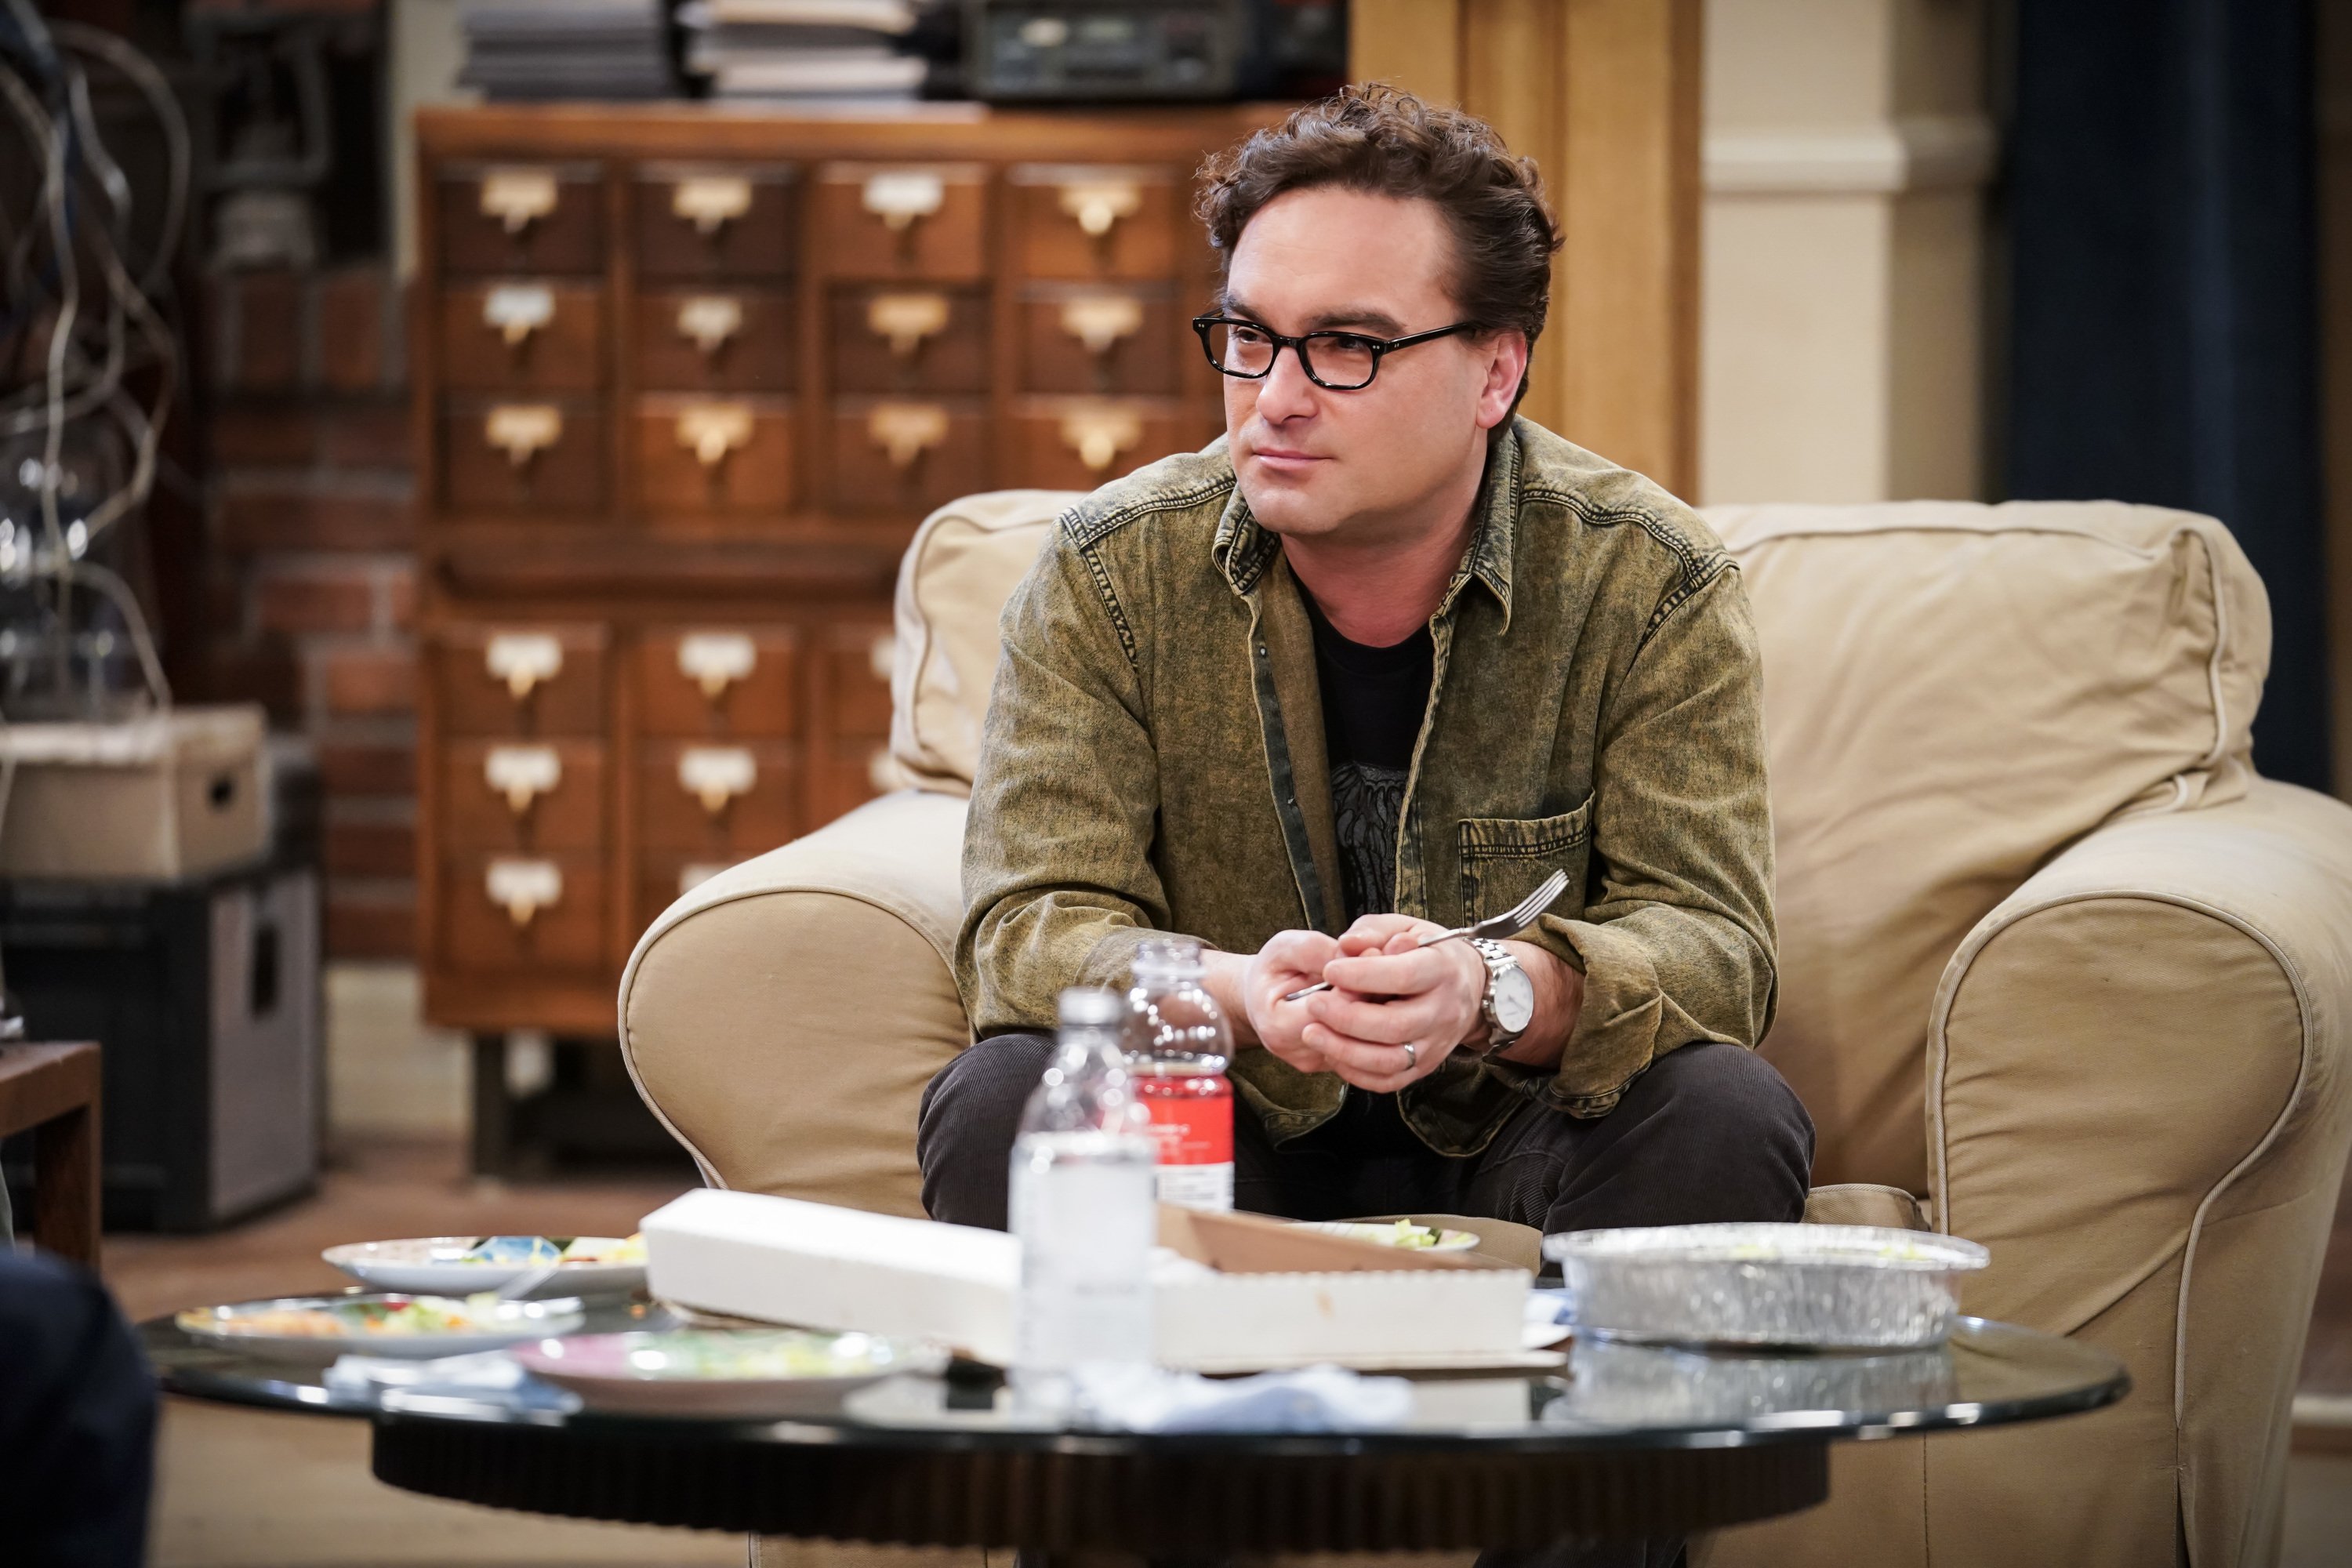 Leonard Hofstadter aus "The Big Bang Theory" | Quelle: Getty Images